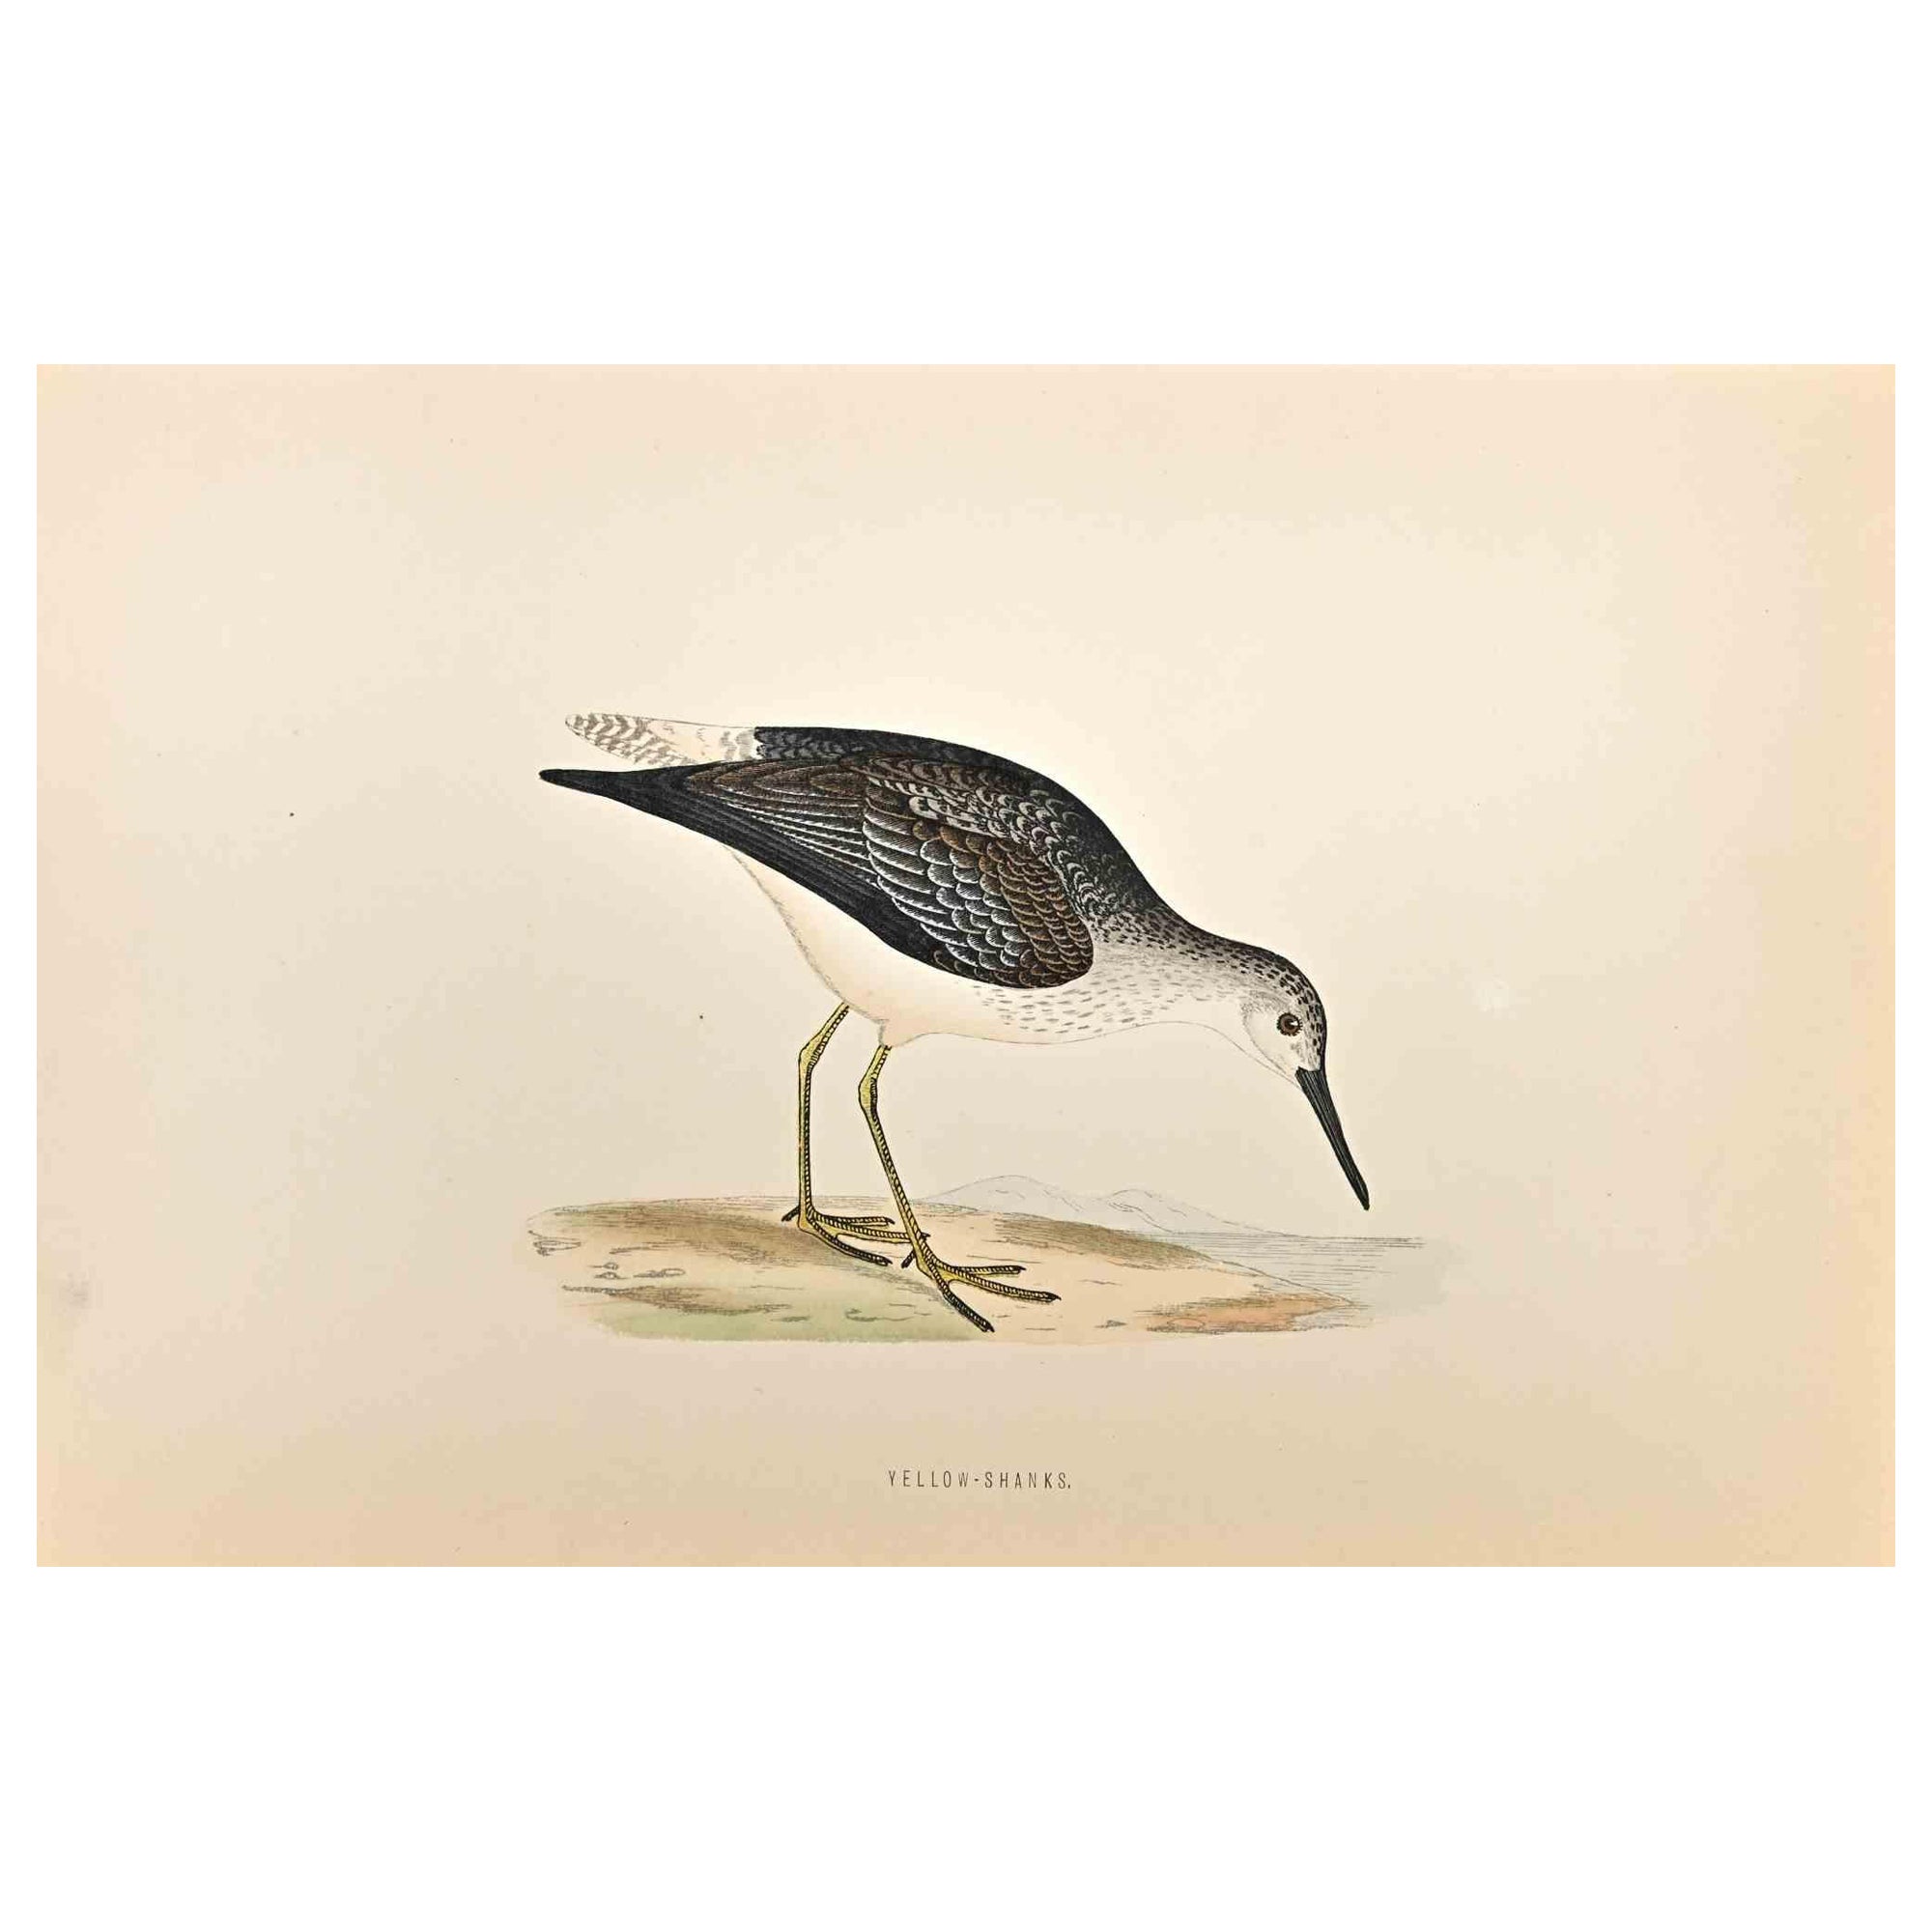 Yellow-Shanks is a modern artwork realized in 1870 by the British artist Alexander Francis Lydon (1836-1917).

Woodcut print on ivory-colored paper.

Hand-colored, published by London, Bell & Sons, 1870.  

The name of the bird is printed on the